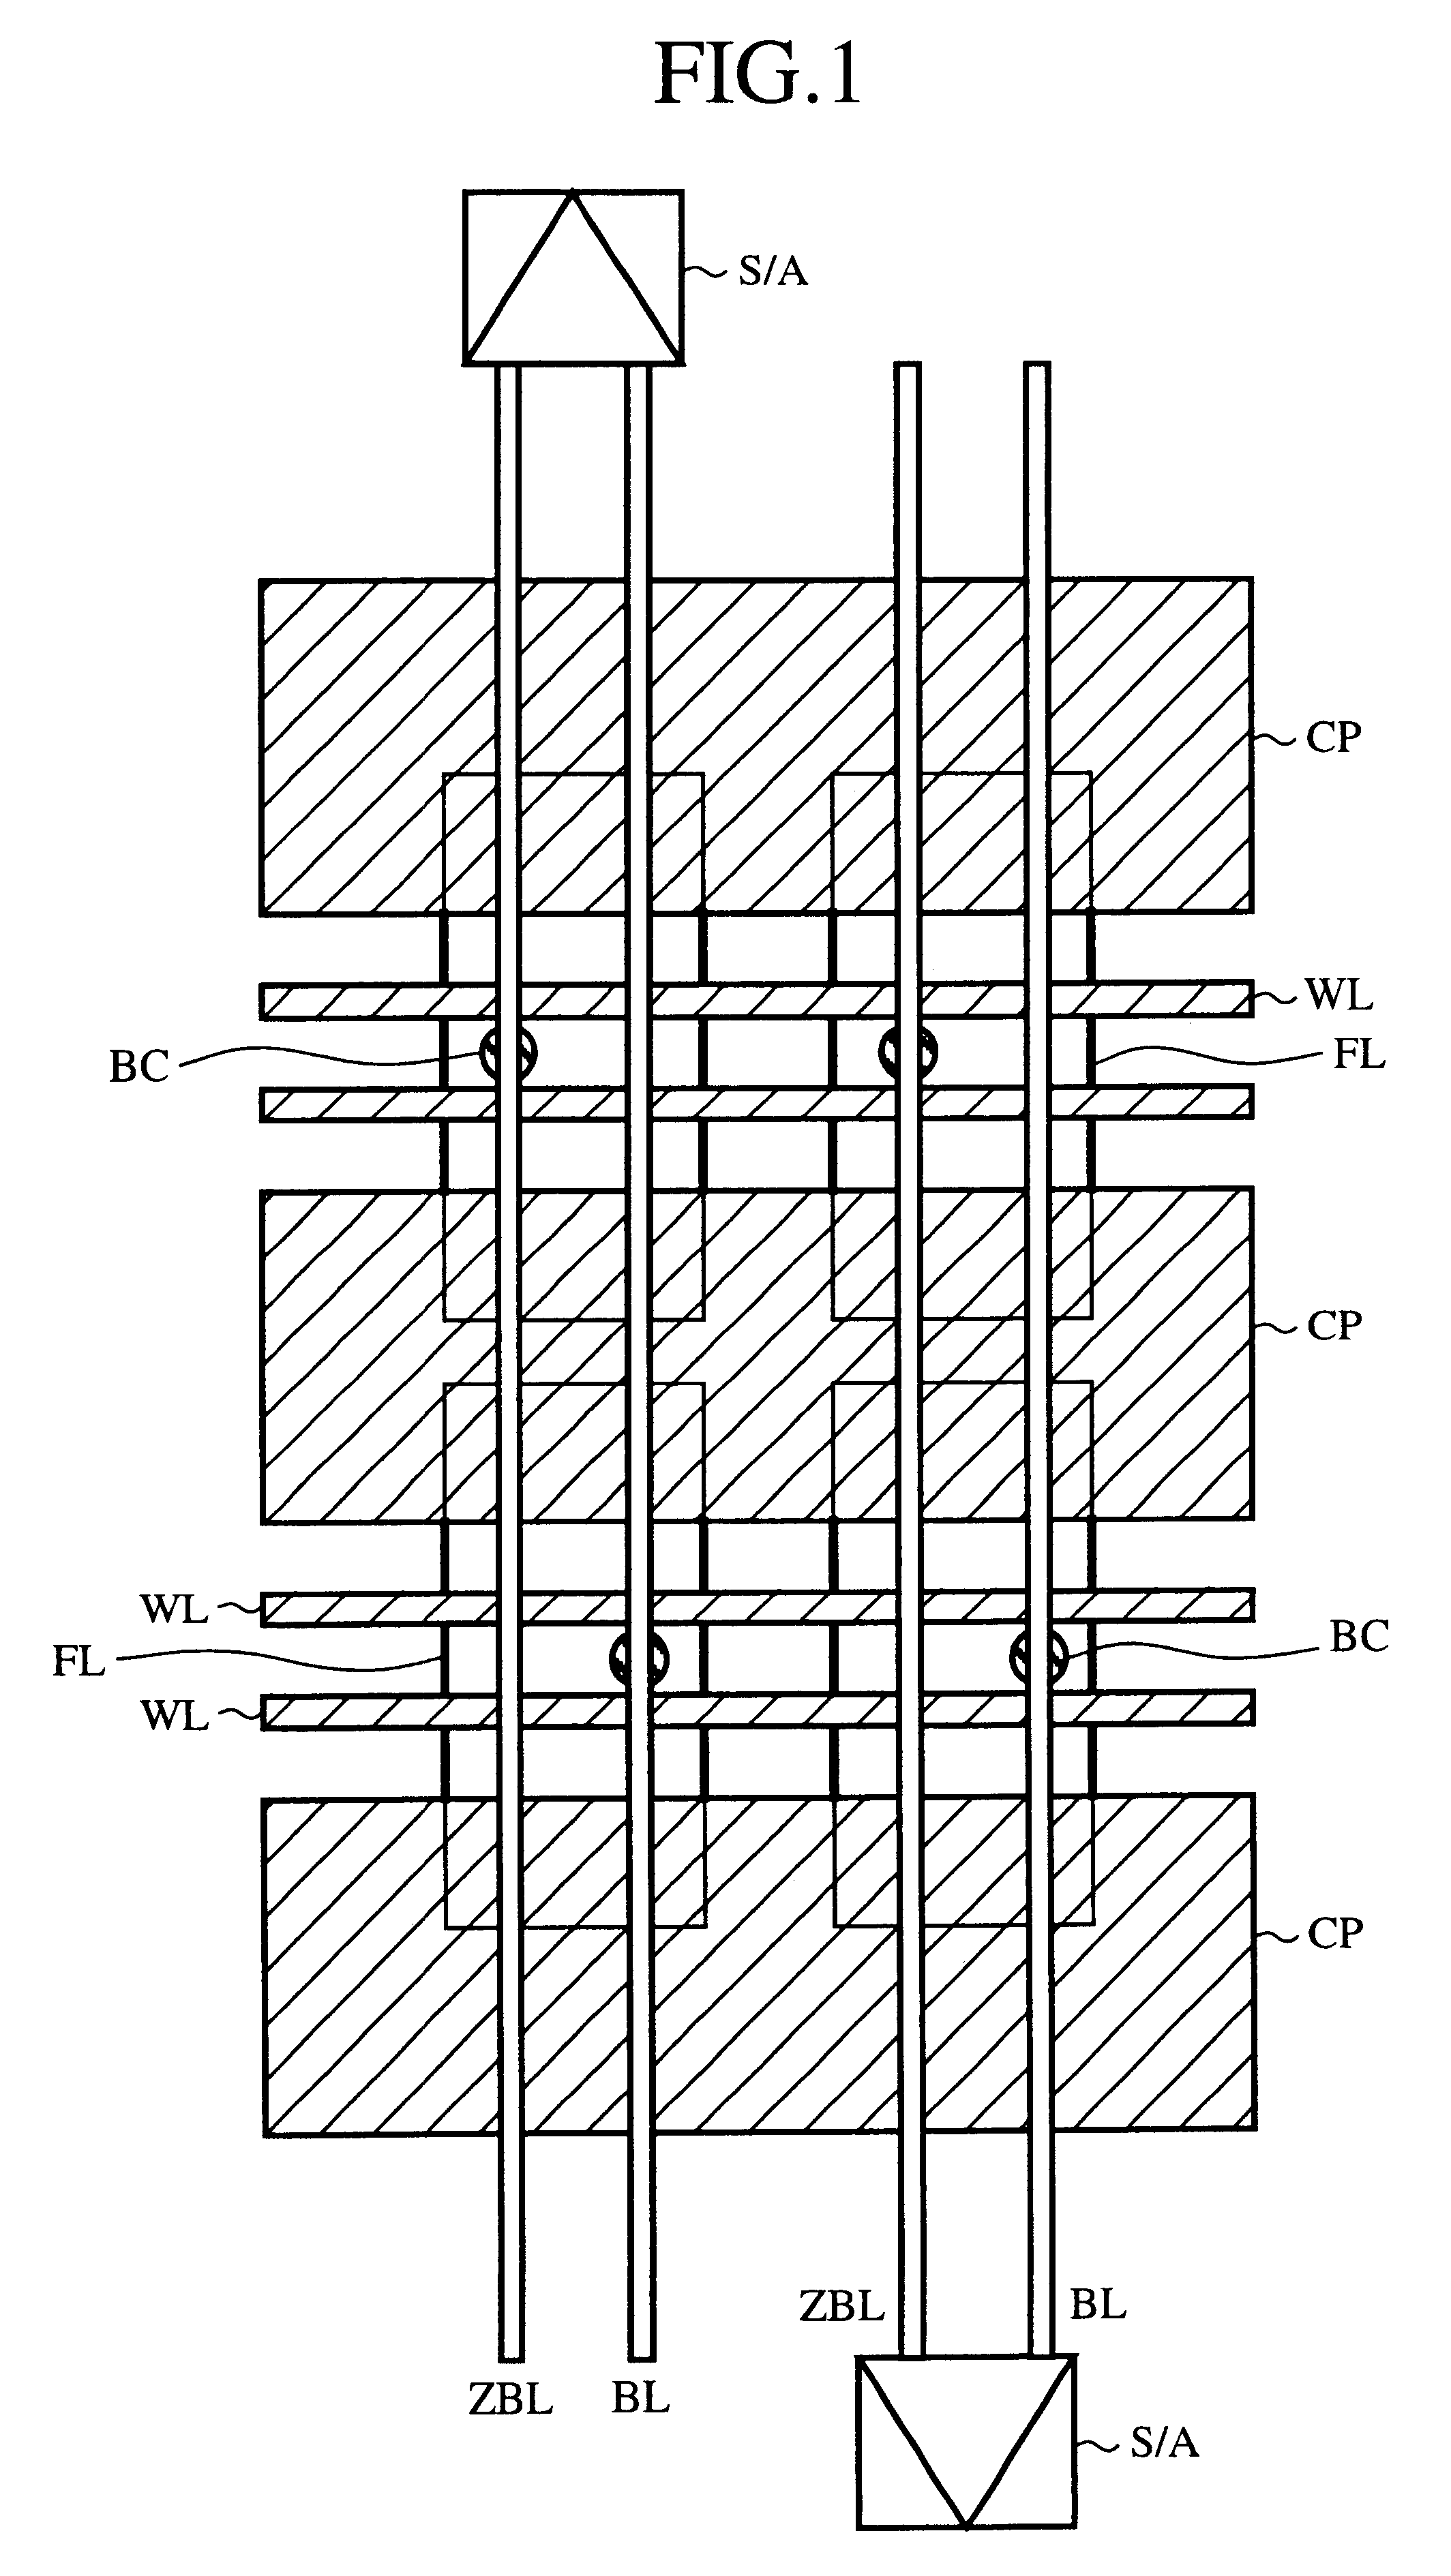 Semiconductor integrated circuit device and method of manufacturing the same, and cell size calculation method for DRAM memory cells